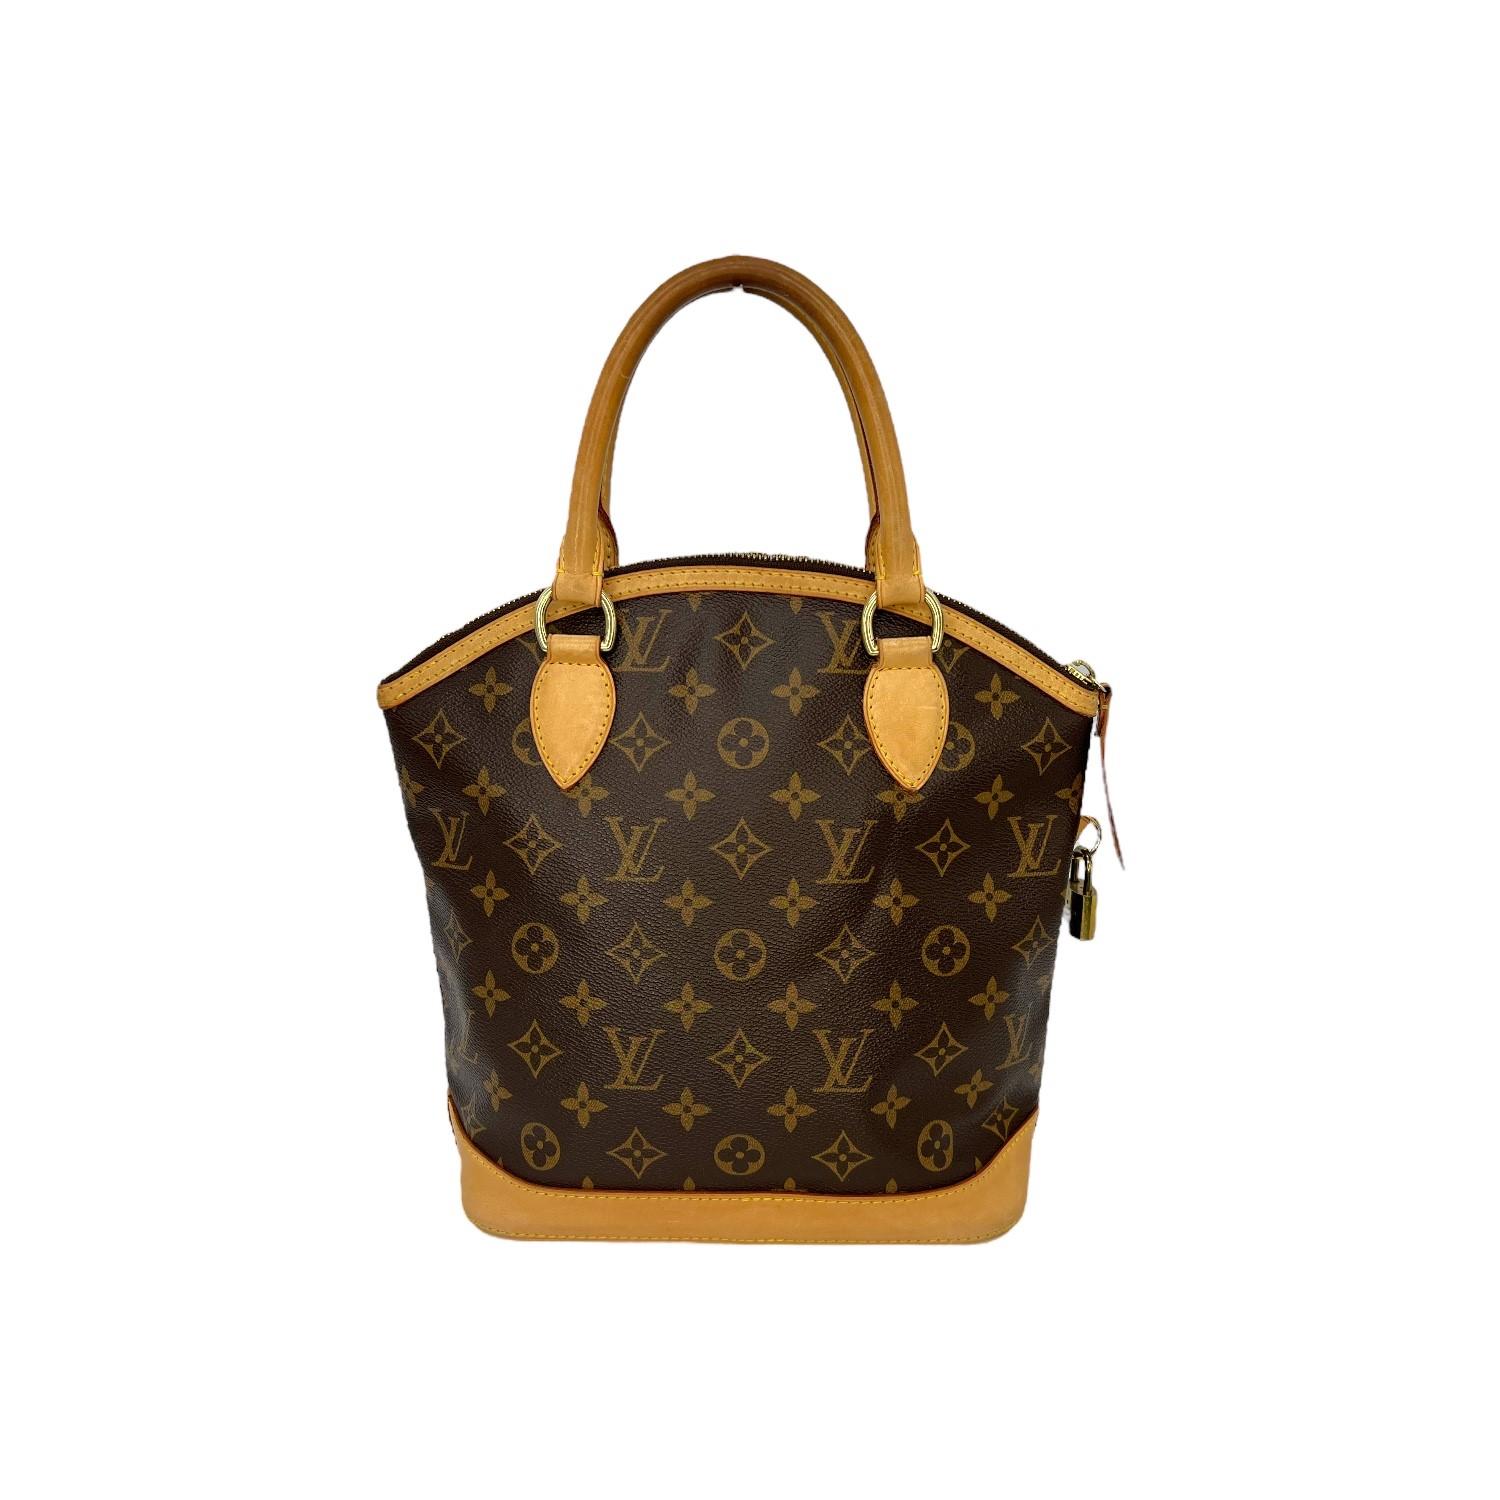 This Louis Vuitton Lockit Vertical Tote was made in the USA in 2006 and it is finely crafted of the classic Louis Vuitton Monogram coated canvas with leather trimming and gold-tone hardware features. It has rolled leather handles. It has a zipper